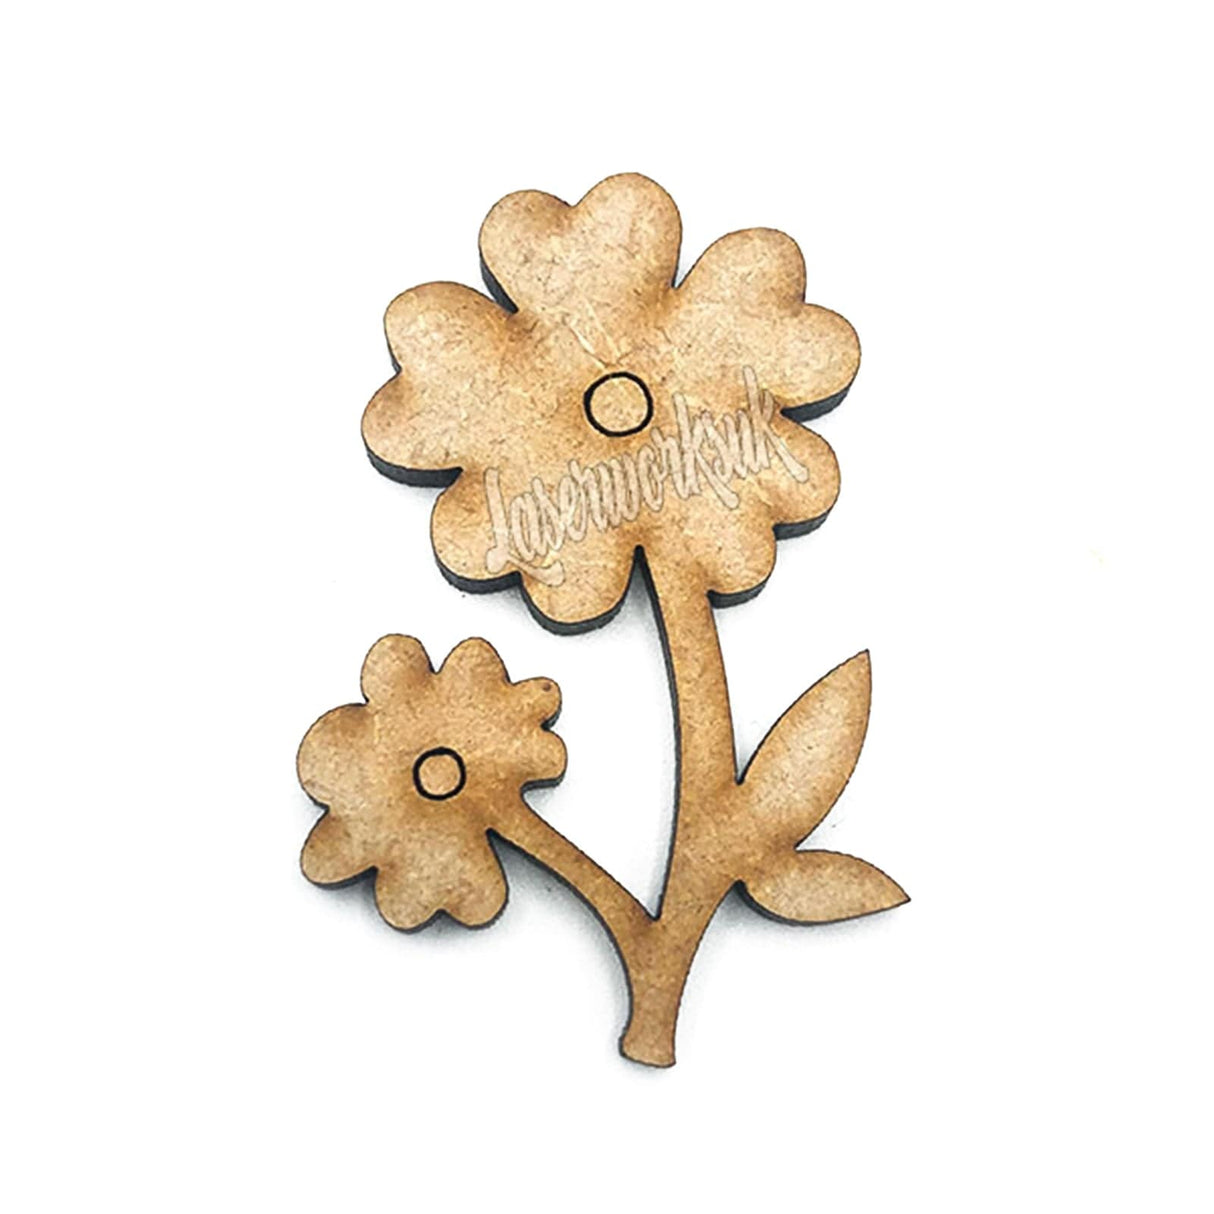 Wooden Craft Flowers on Stems - Perfect For Crafts - Laserworksuk